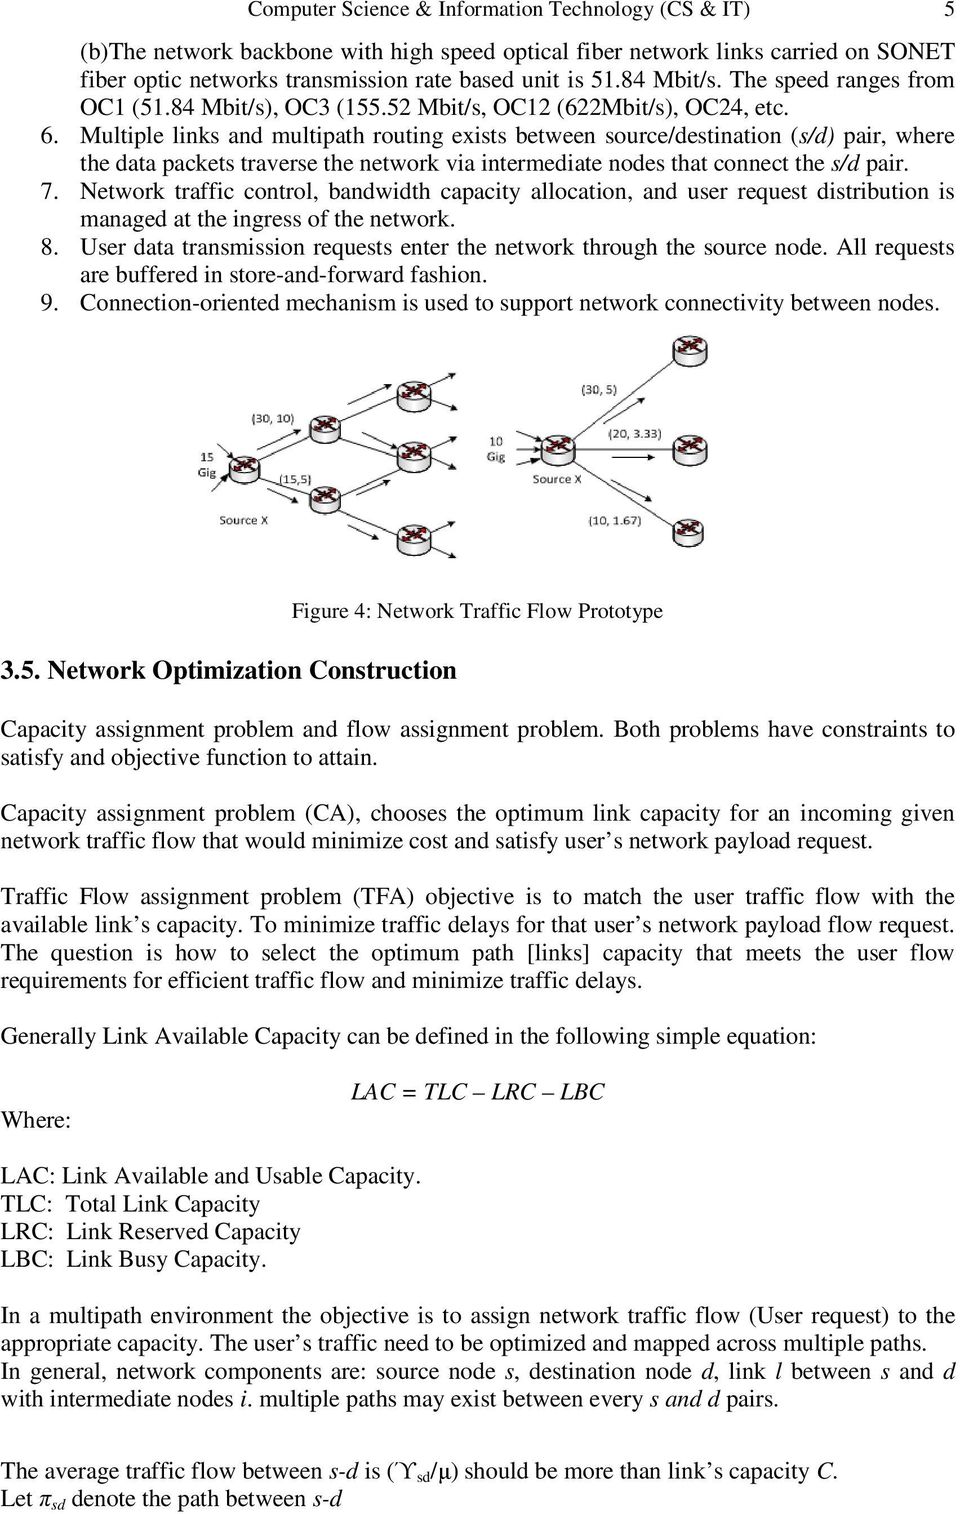 Multiple links and multipath routing exists between source/destination (s/d) pair, where the data packets traverse the network via intermediate nodes that connect the s/d pair. 7.